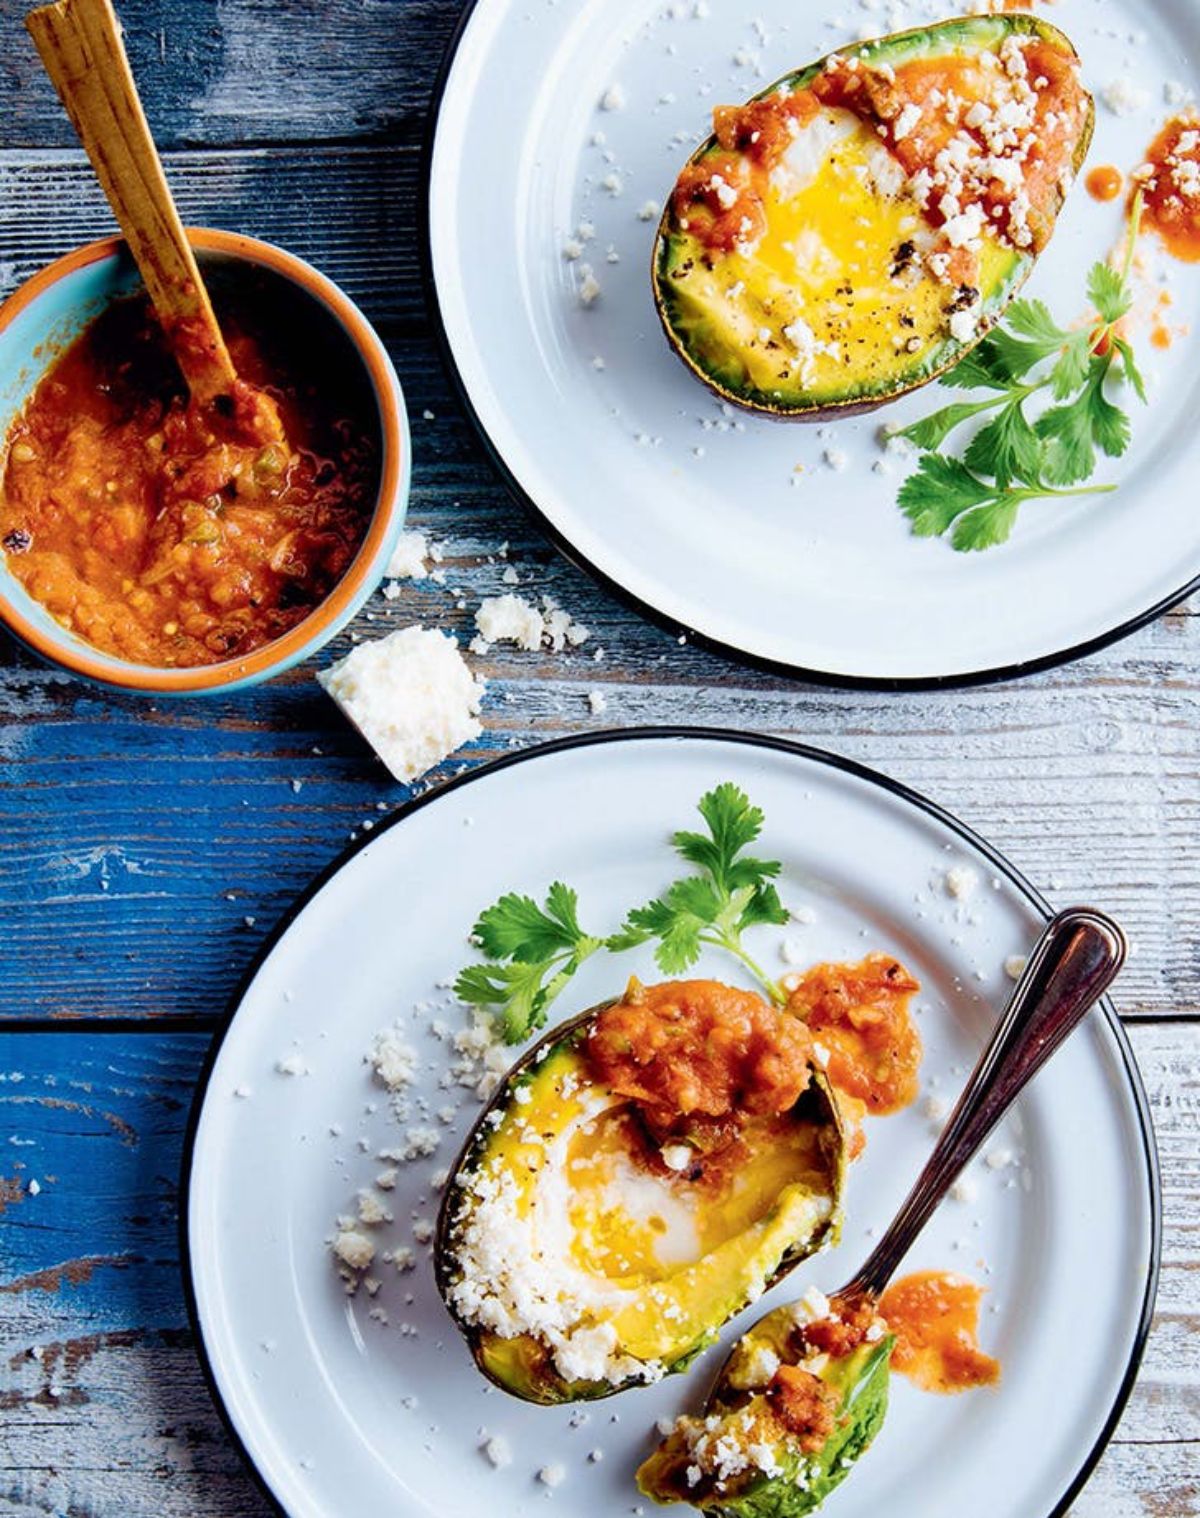 On a painted blue table are 2 white plates with black rims. On each is half an avocado with a baked egg inside it, parmesan sprinkled over the top and parsely sprigs on the side. On the left is a blue pot with red sauce in it and a small wooden spoon